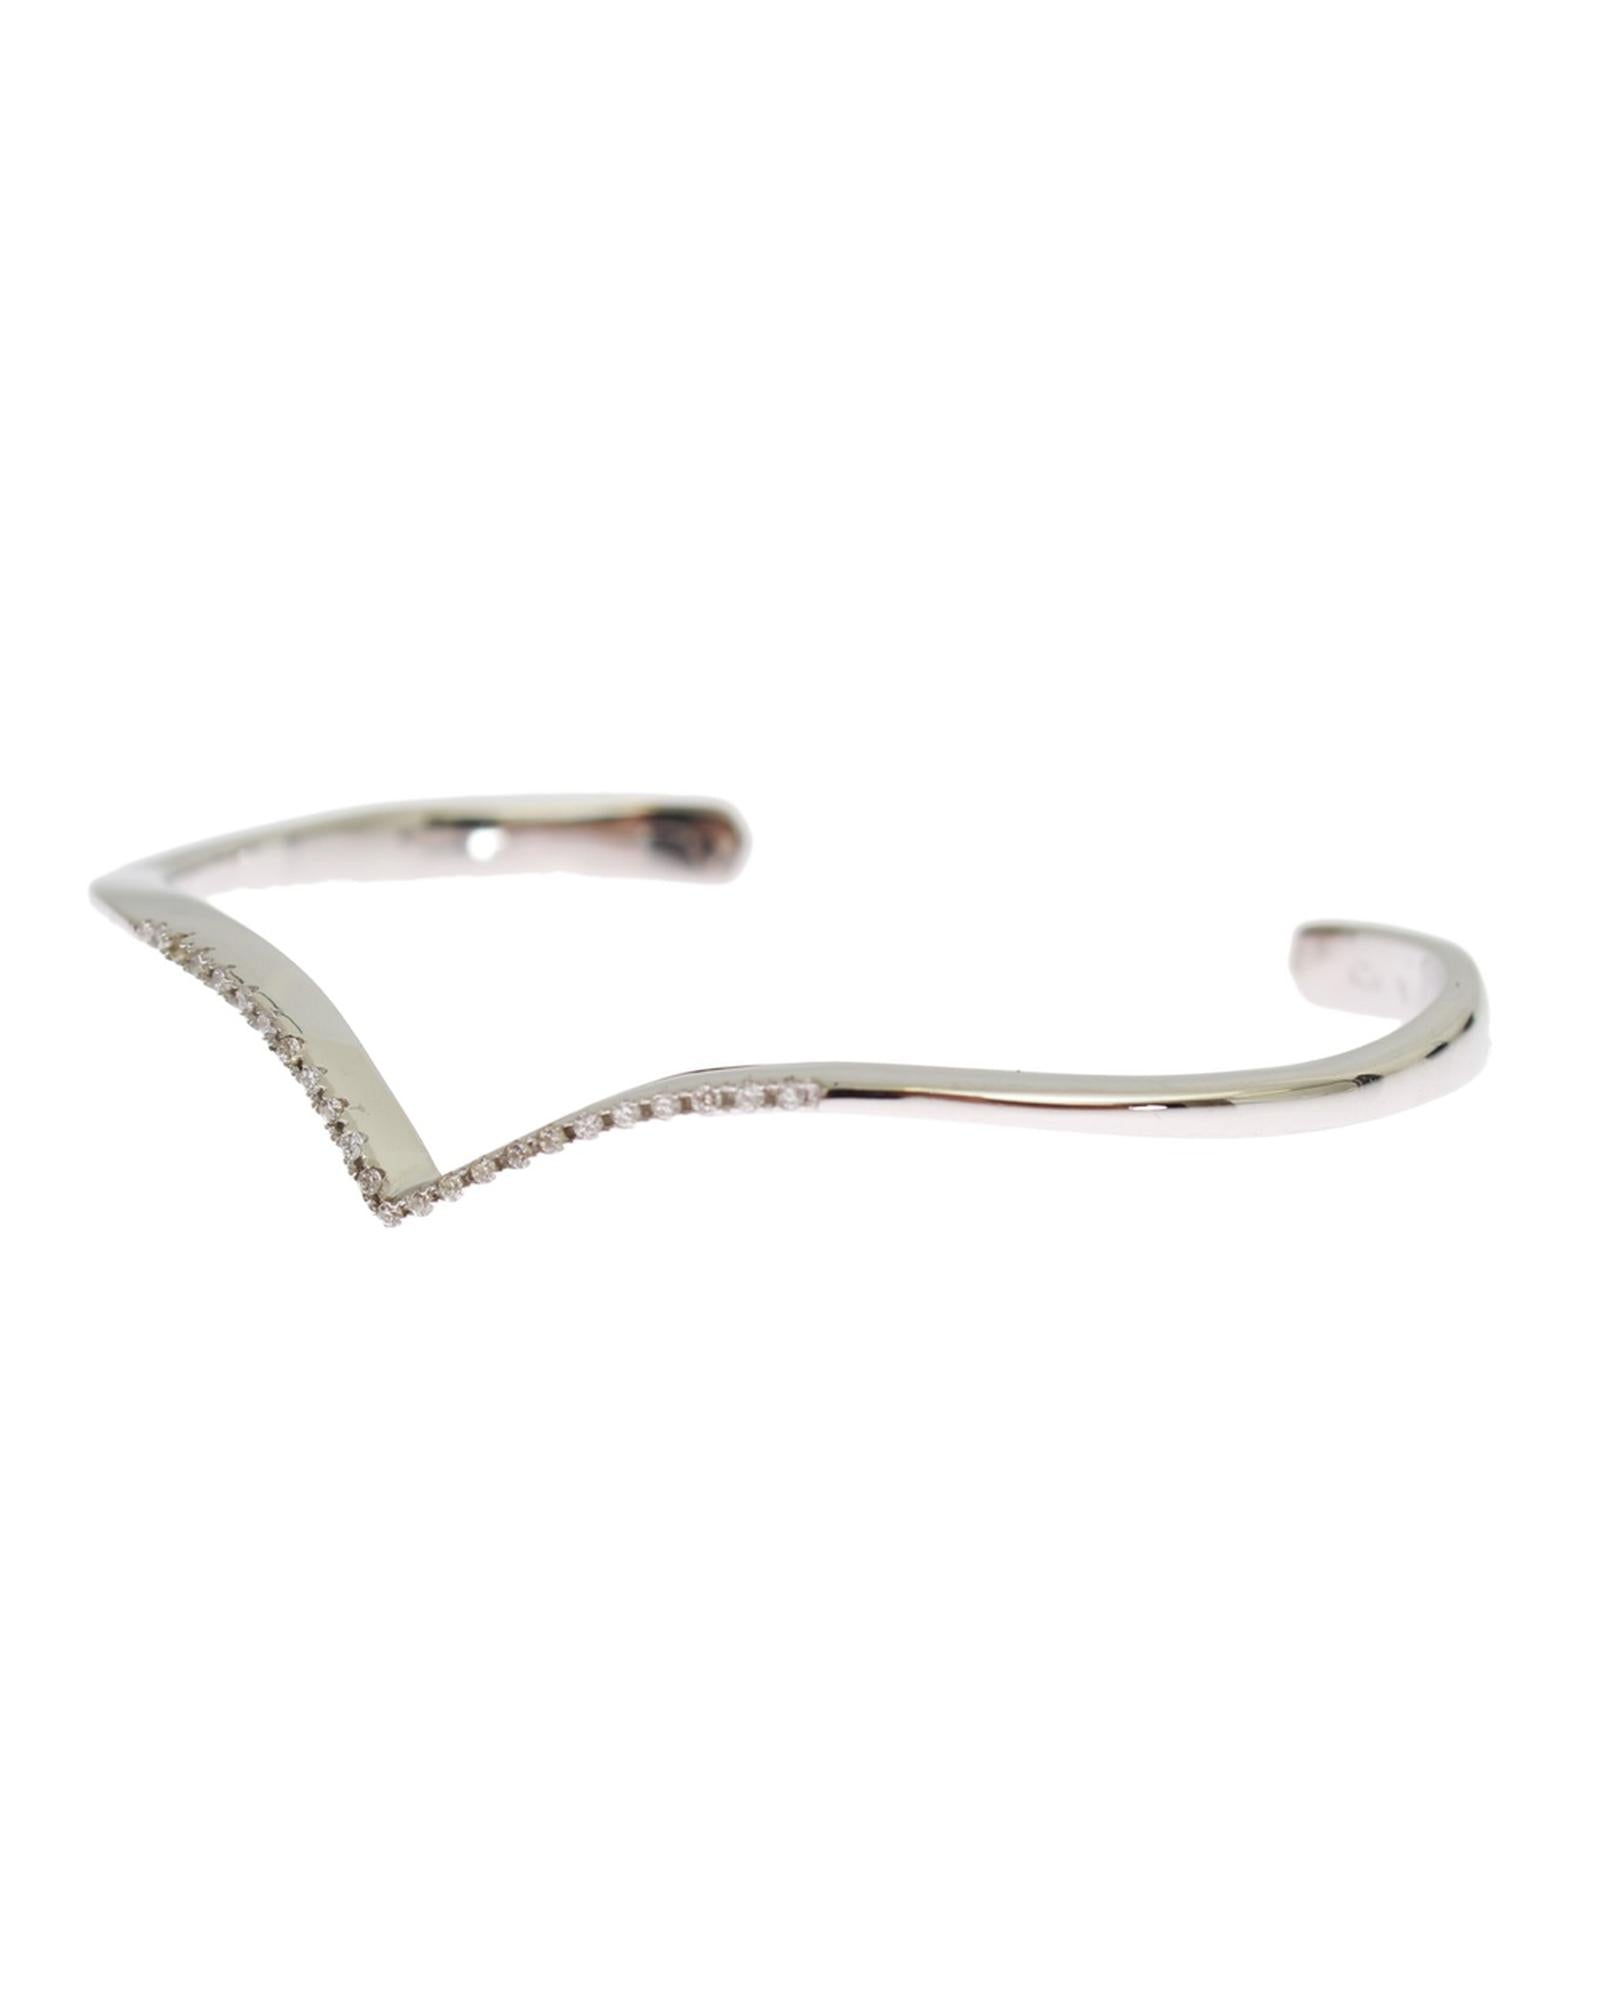 Skyfall Arched Wing Cuff Bangle One Size Women